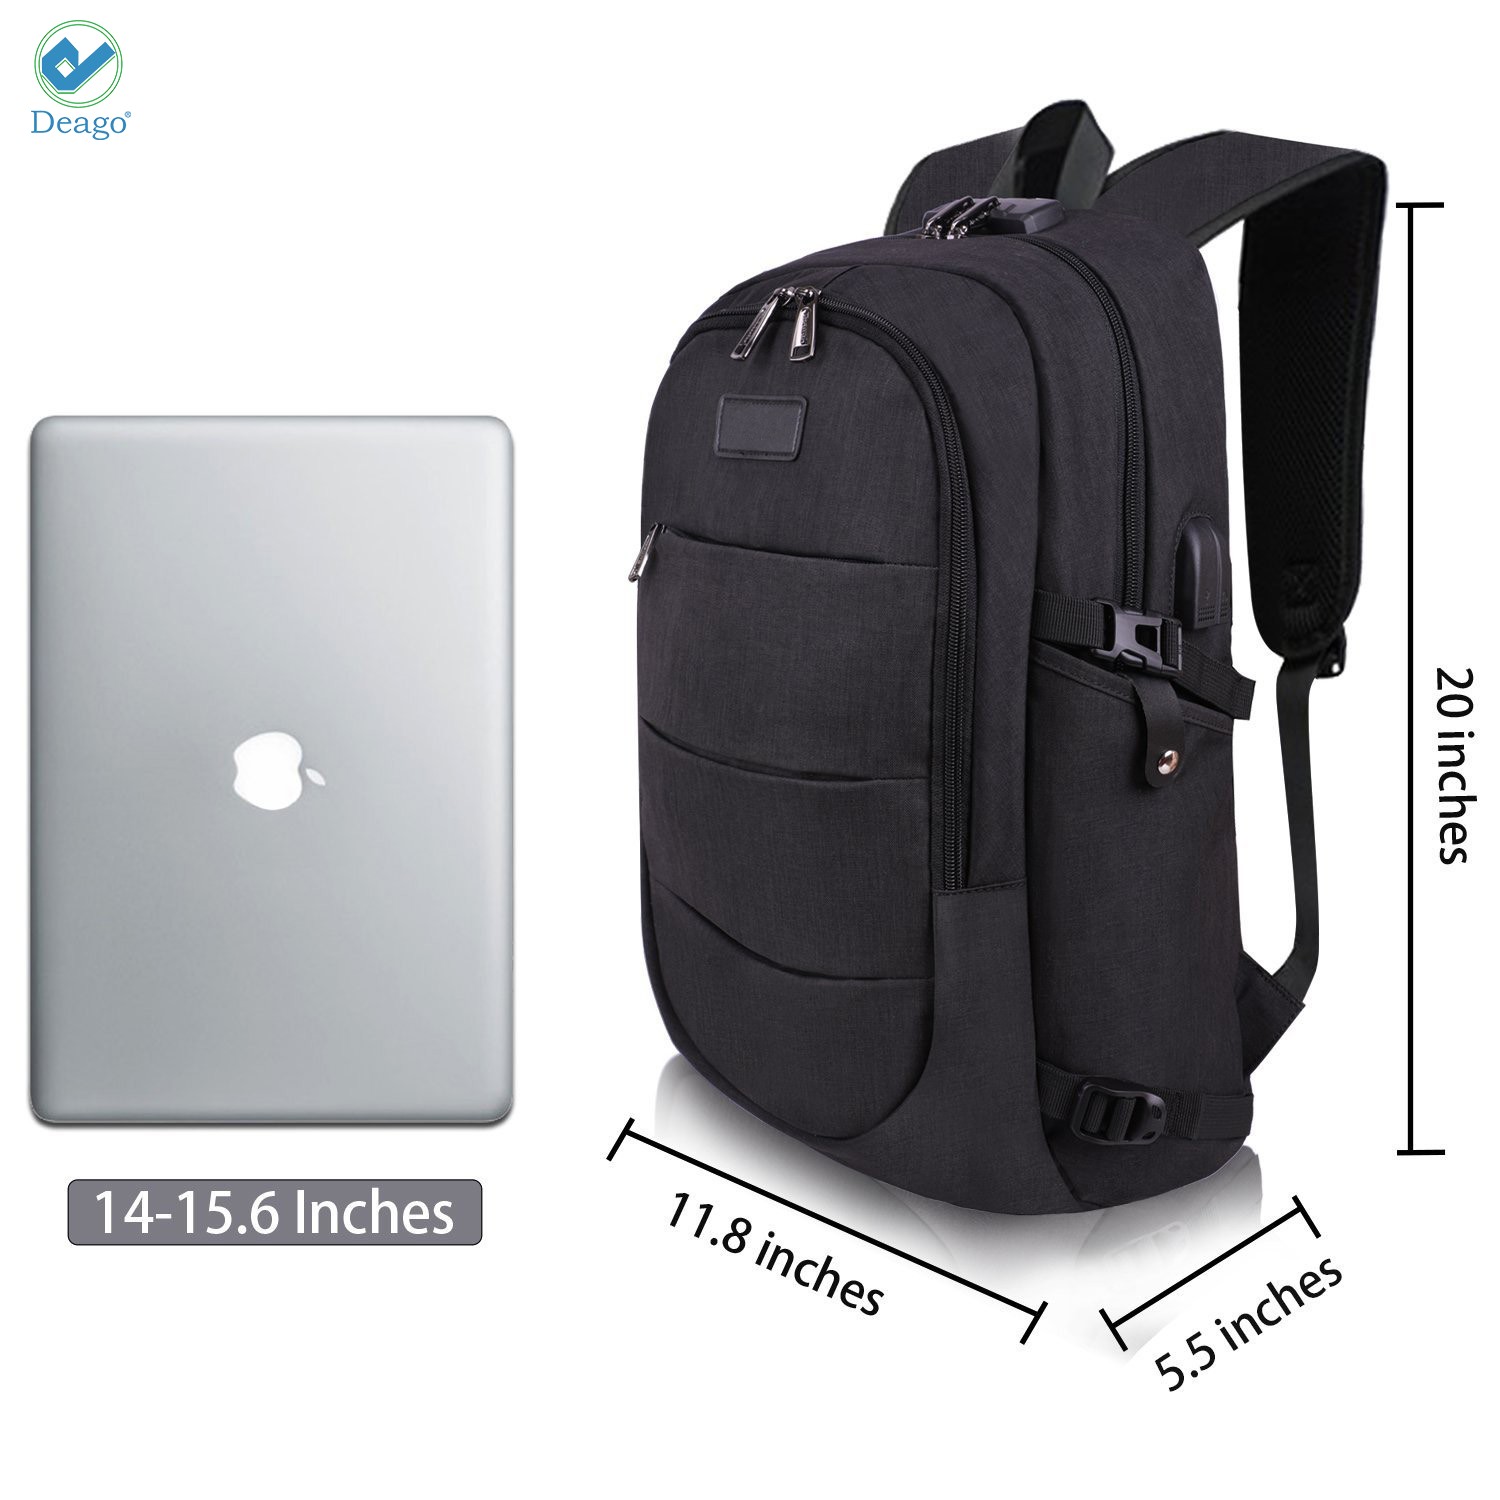 Deago Laptop Backpack, Business Anti Theft with lock Waterproof Travel Backpack with USB Charging Port for Laptops up to 17 inches (Black) - image 3 of 9